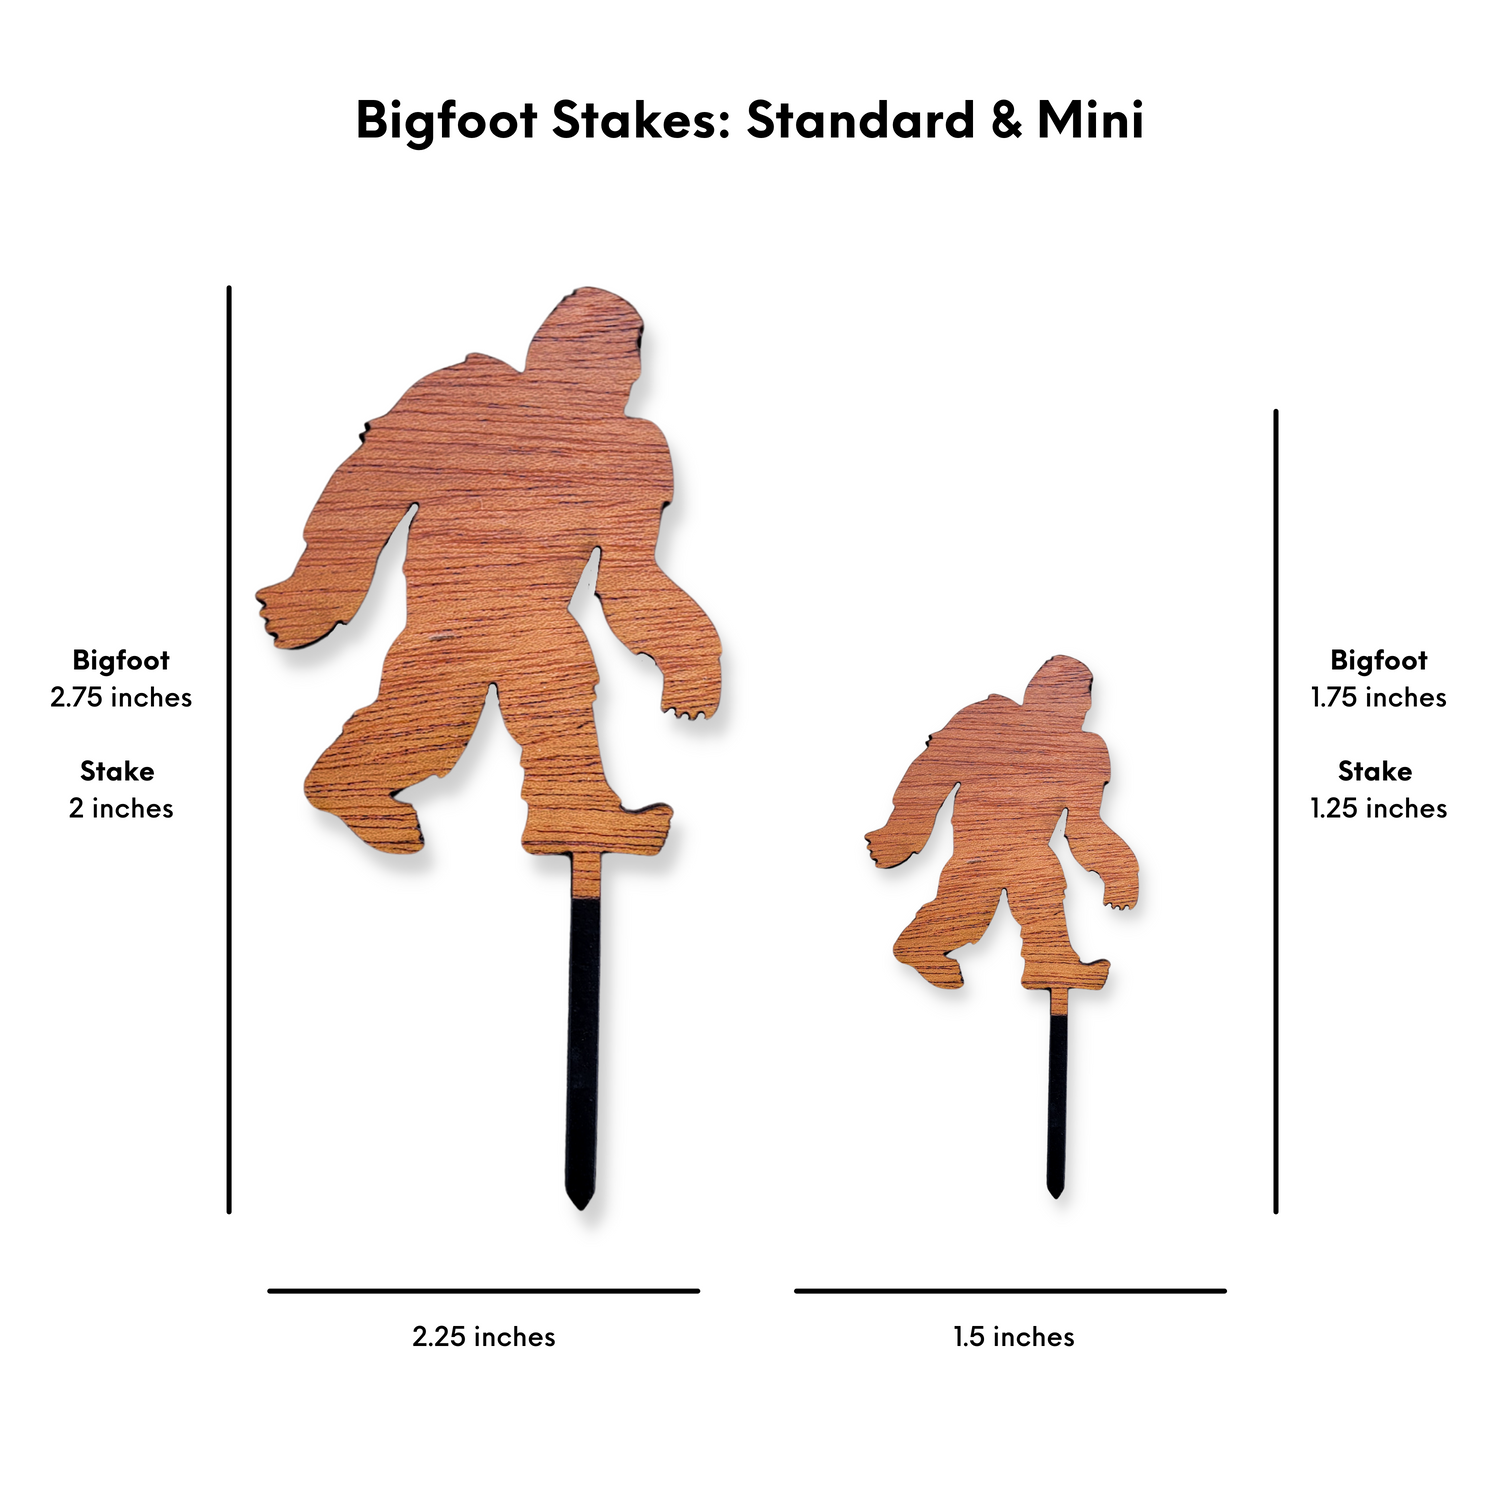 Size chart for bigfoot decorative plant stakes. Two size options against a white background with measurement labels reflecting those in the written description.